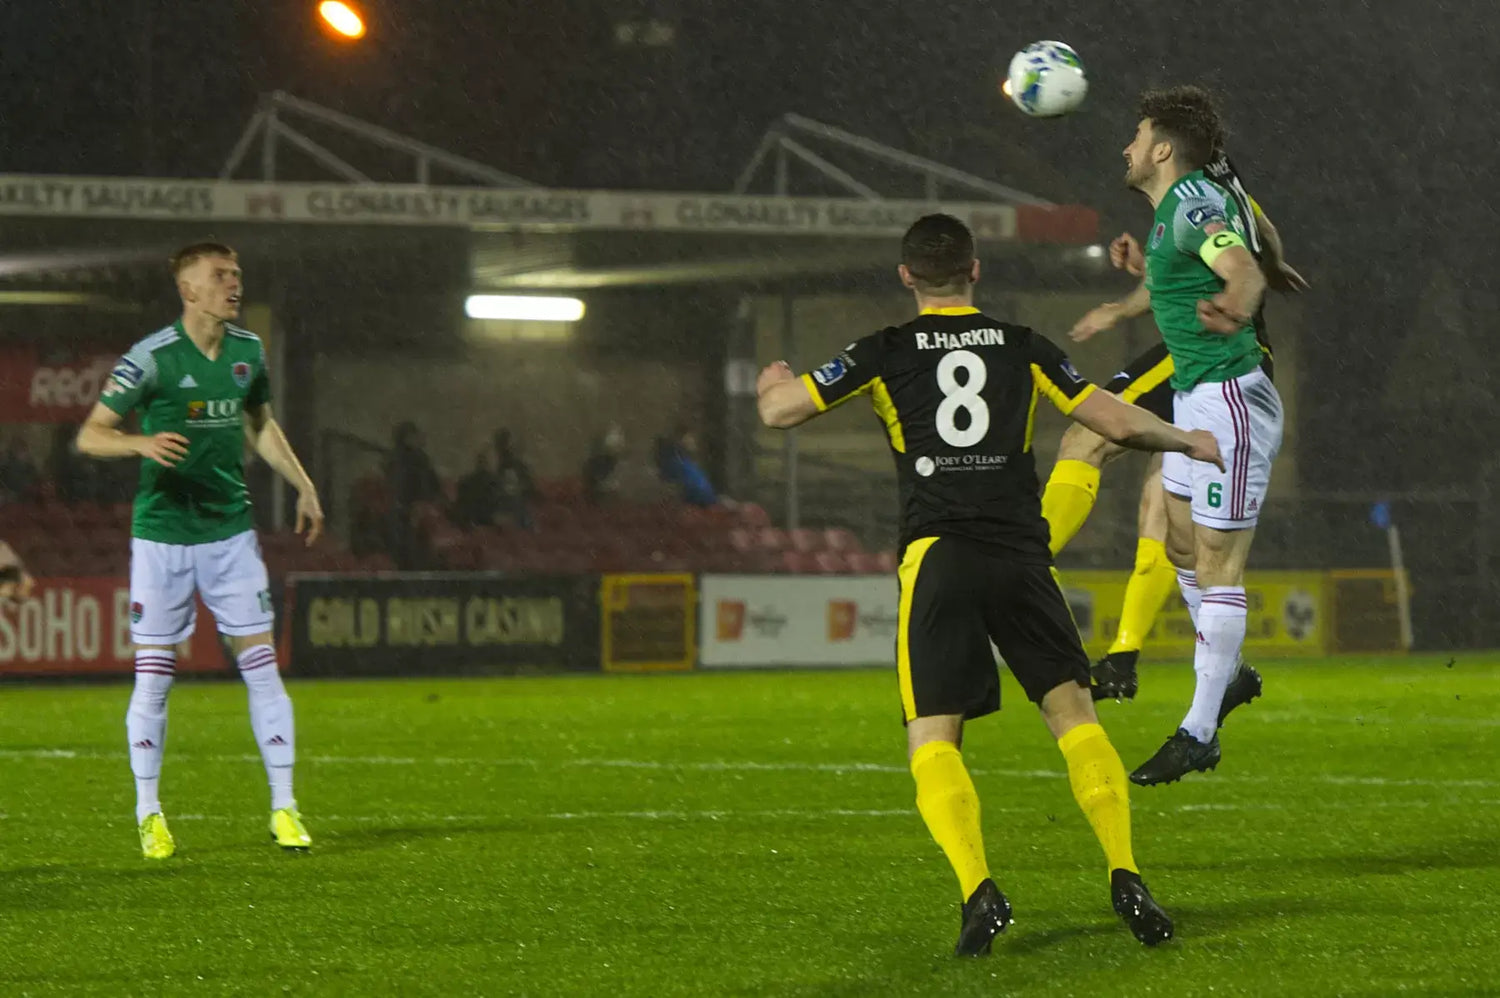 Finn Harps vs Cork City: All You Need to Know!